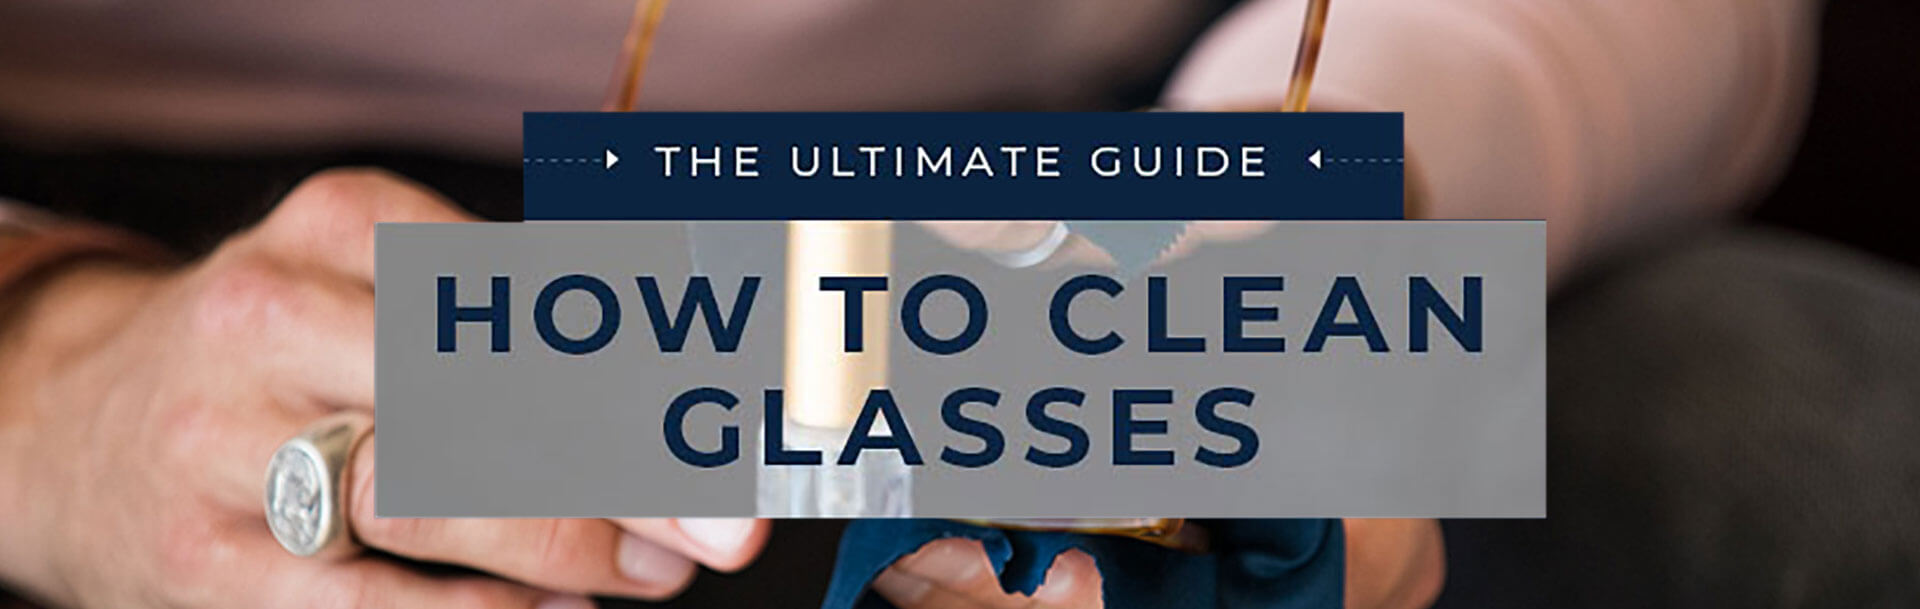 Largest image in The Ultimate Guide: How to Clean Glasses